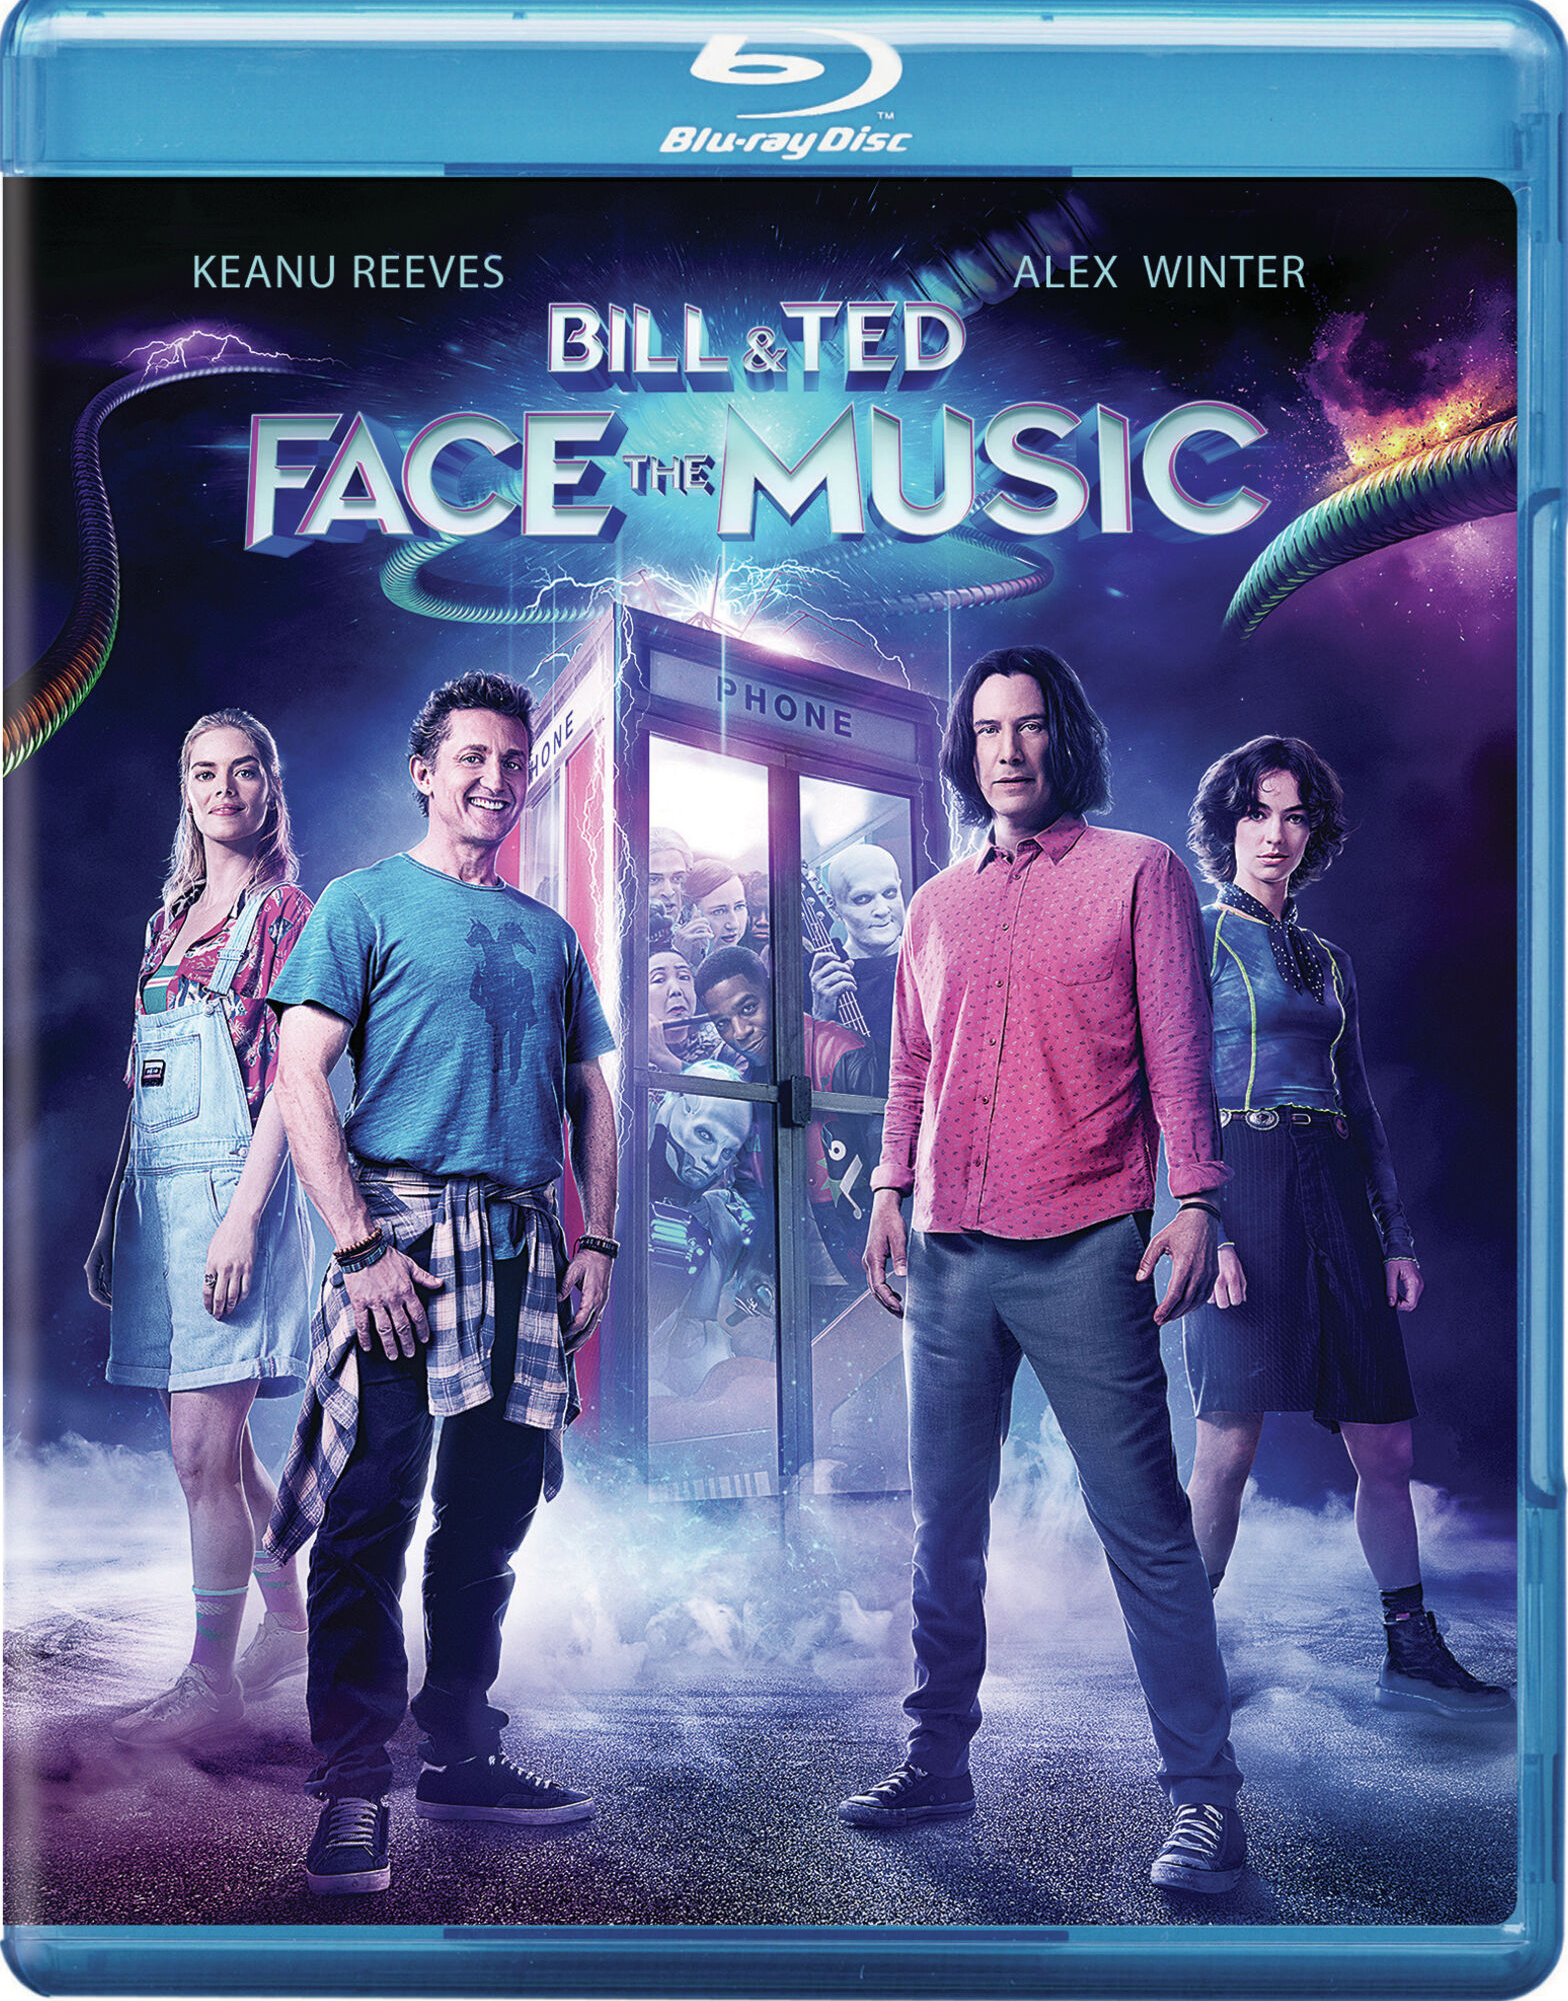 [2020]　Bill　[Blu-ray]　Ted　Best　Face　the　Music　Buy